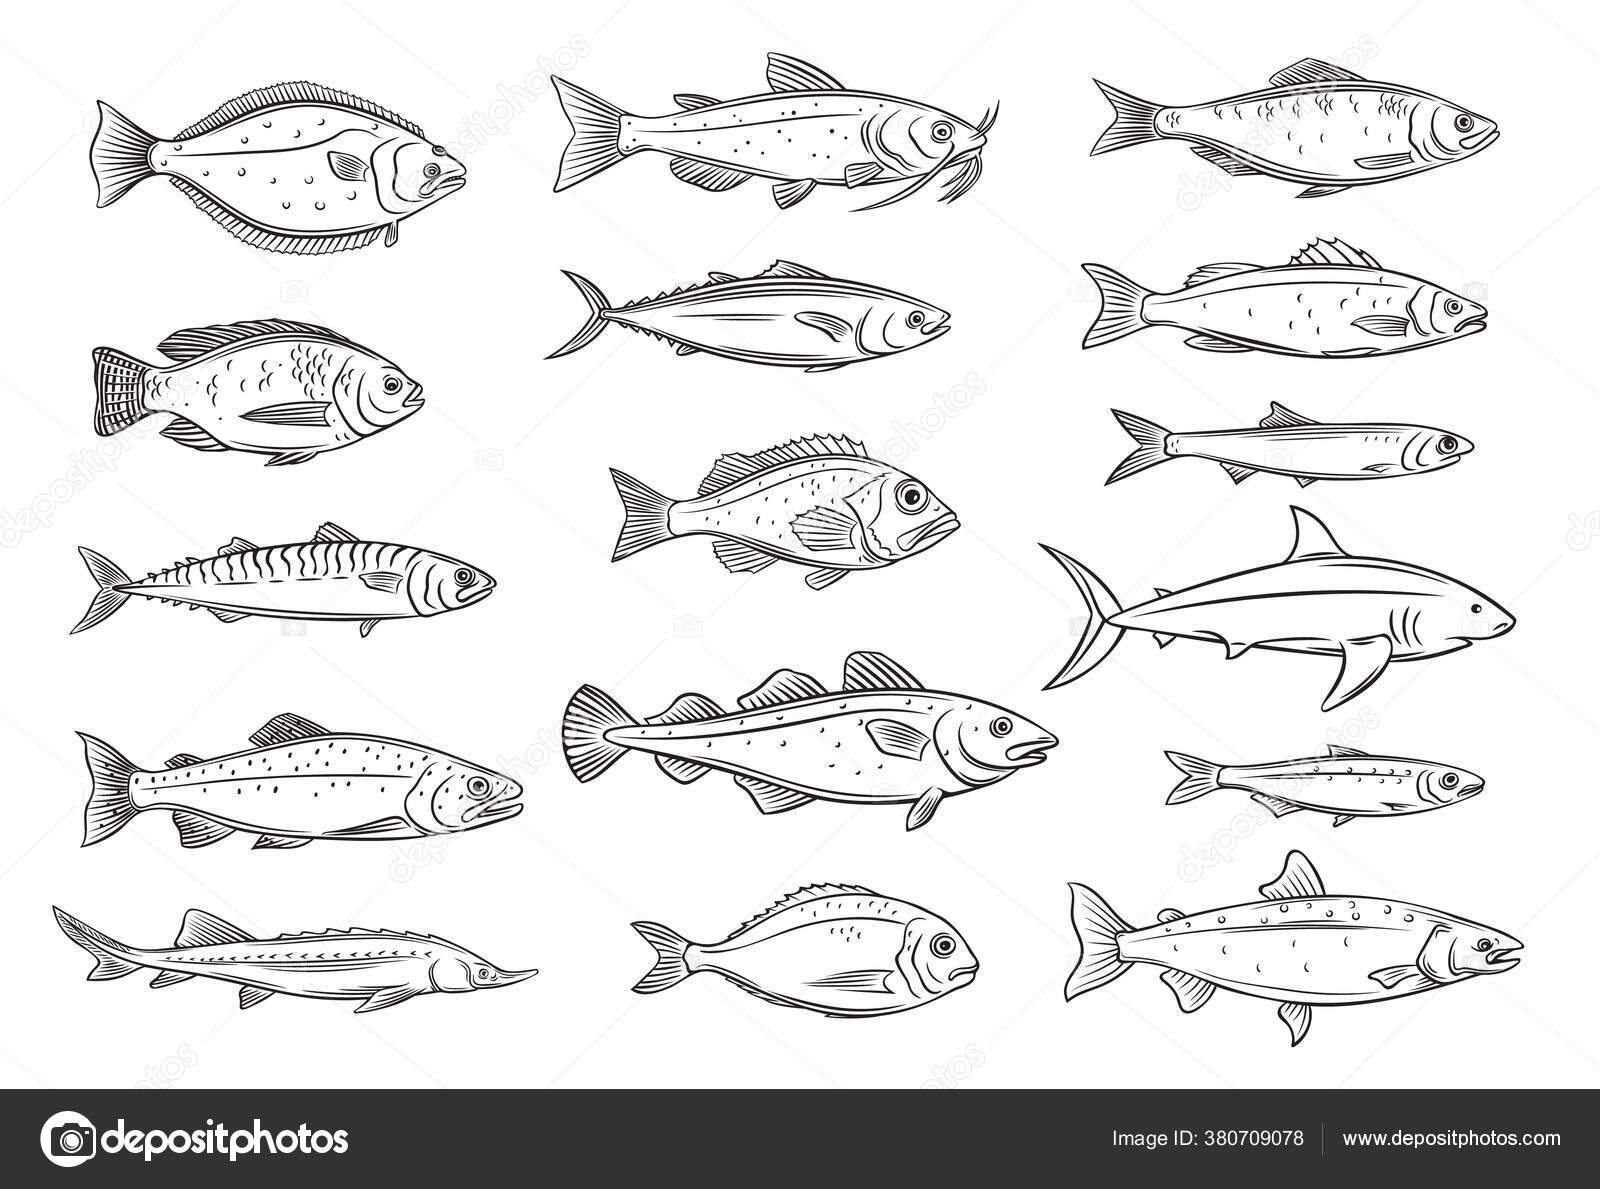 How to Draw a Tilapia